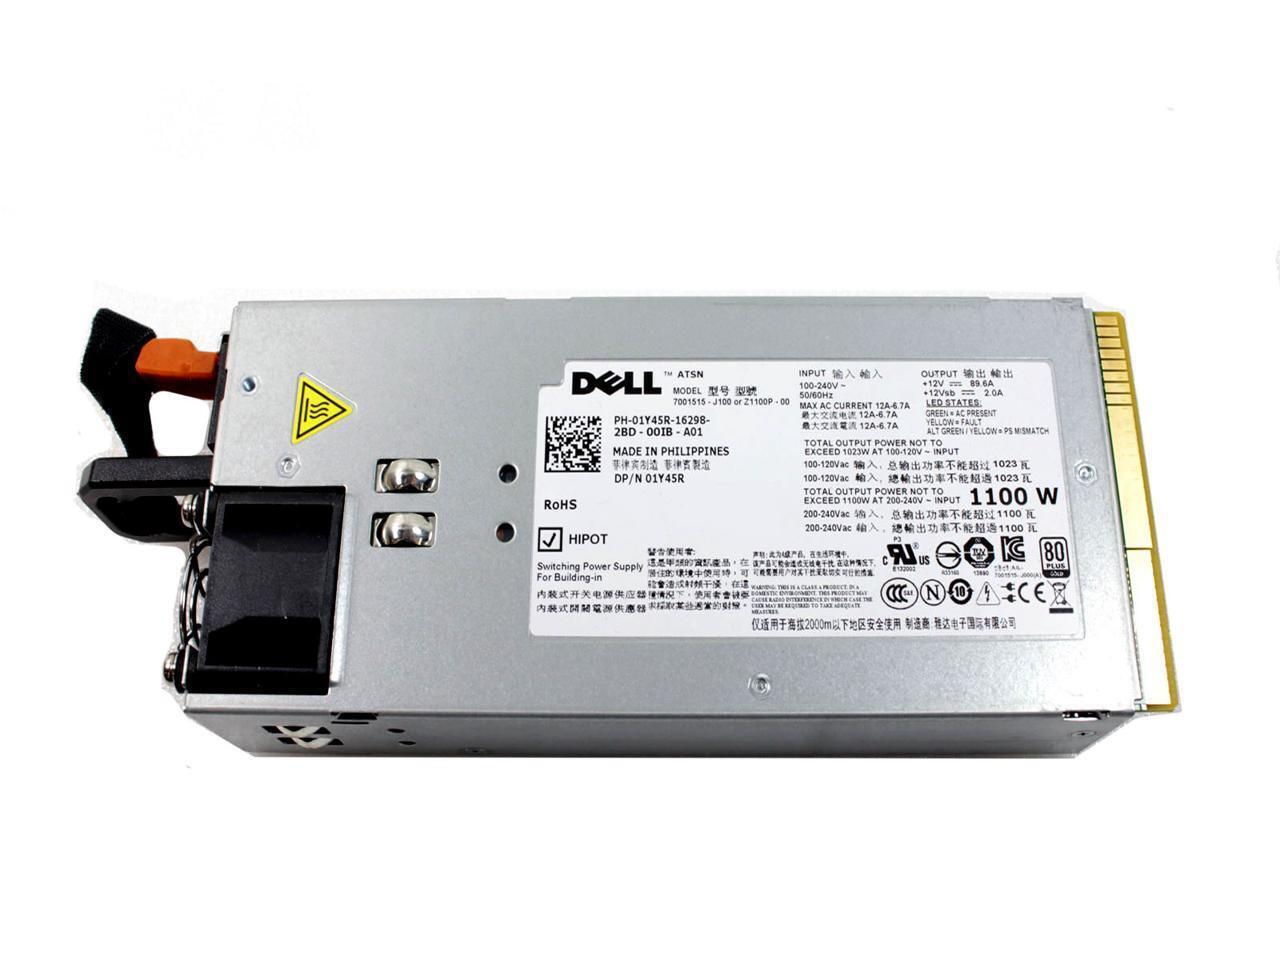 TCVRR DELL POWER SUPPLY 1100W L1100A-S0 PS-2112-2D1-LF 0TCVRR | GVHPX | 9PG9X